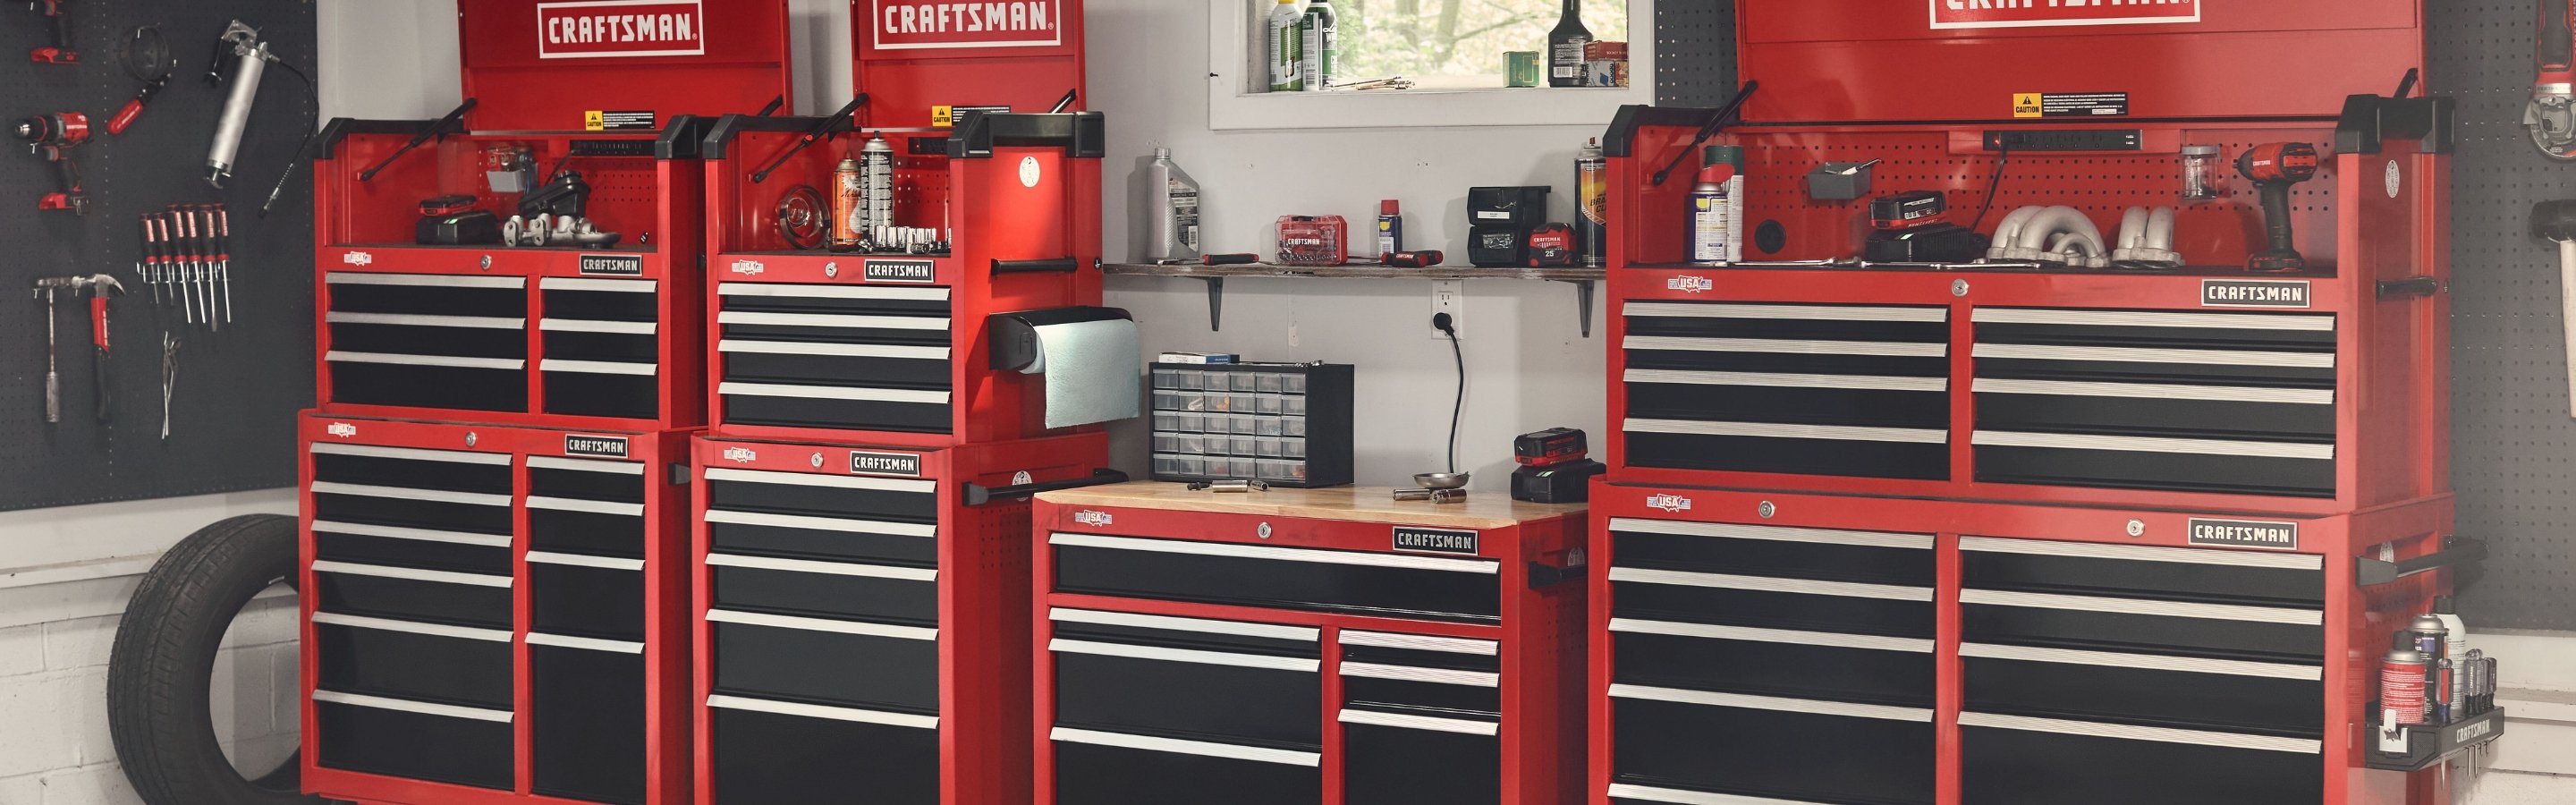 Tool Chests & Tool Cabinets, CRAFTSMAN